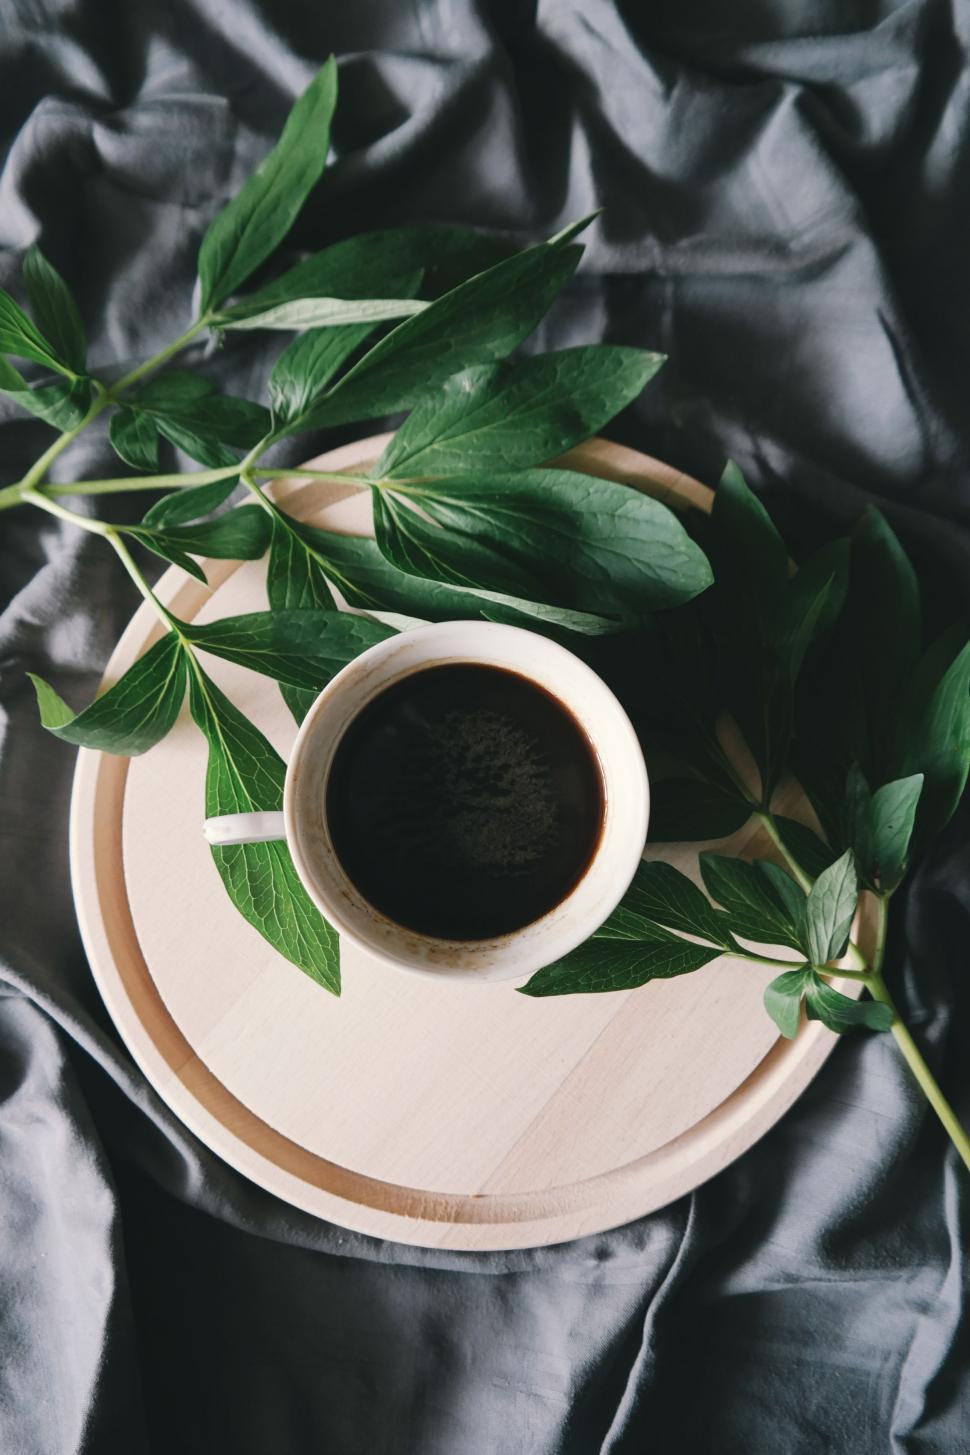 Free Image of A Cup of Coffee and Green Leaves 